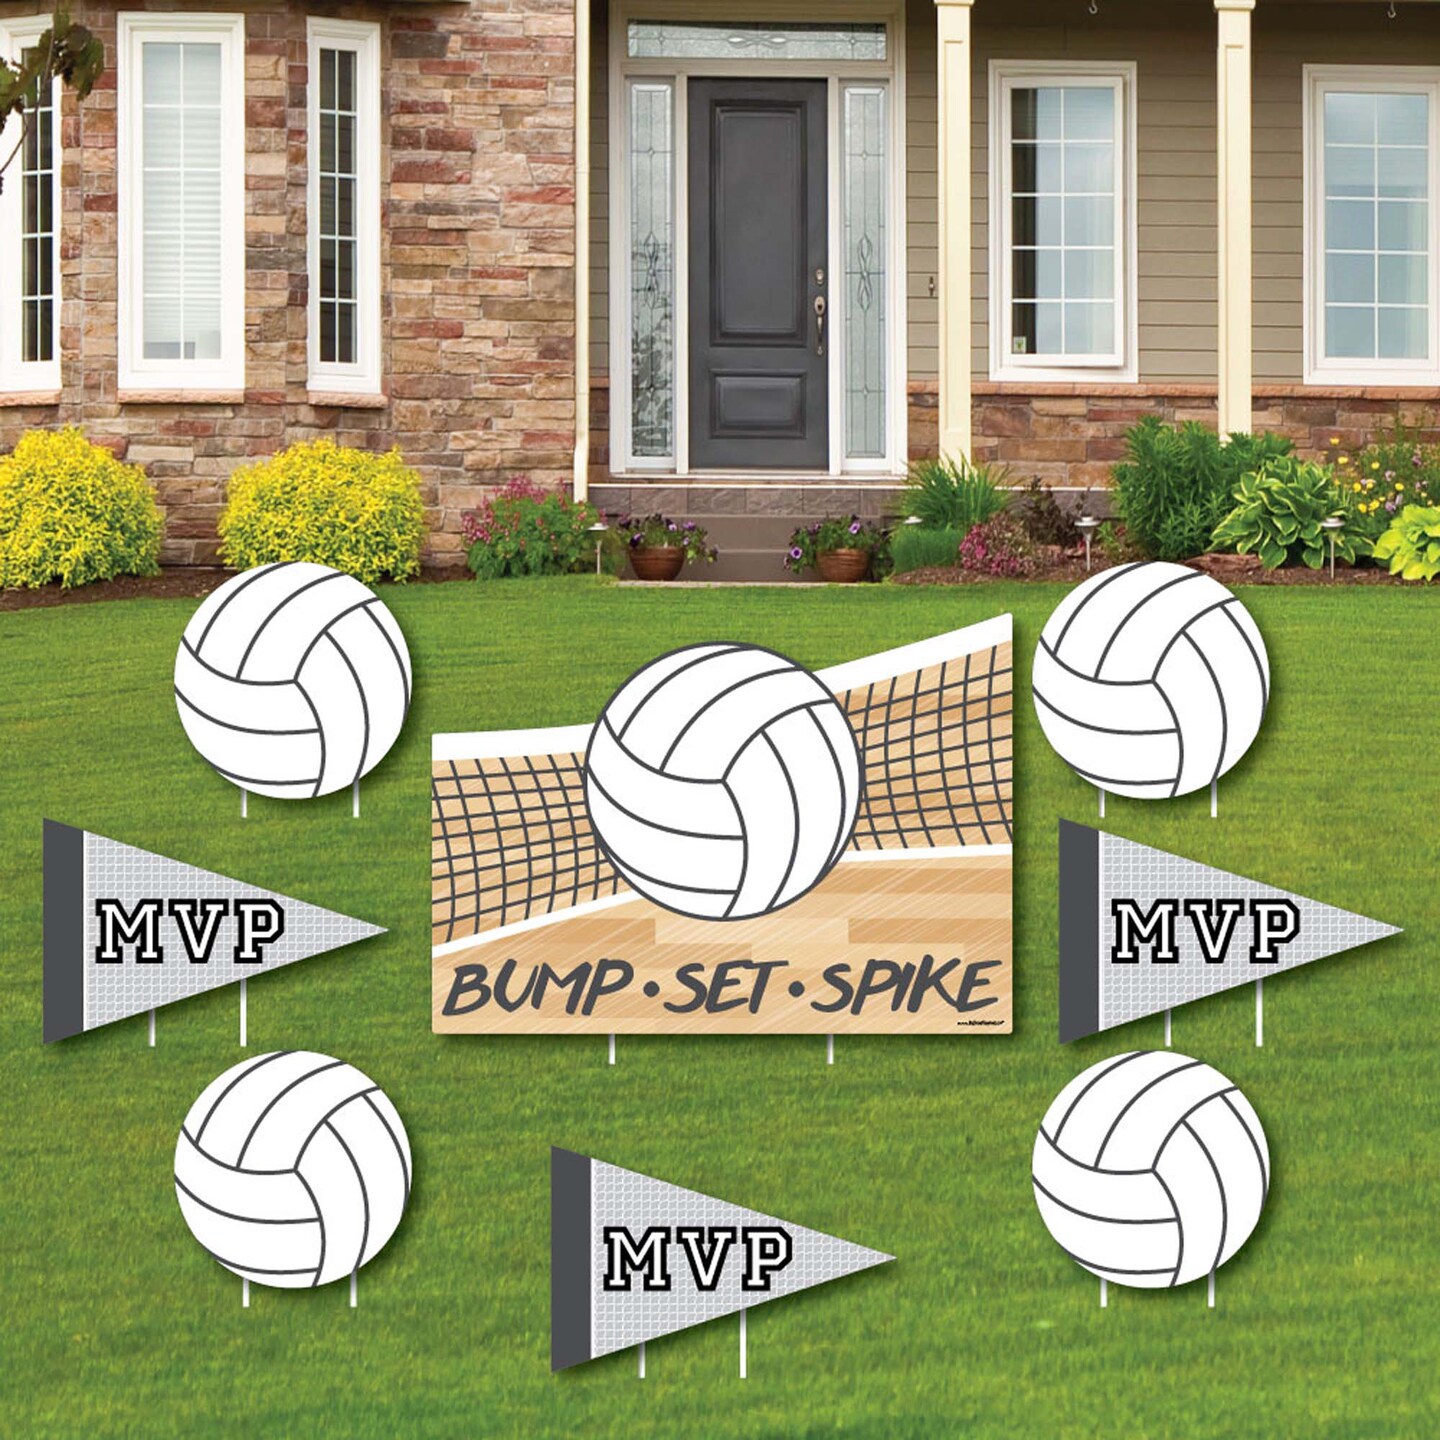 Big Dot of Happiness Bump, Set, Spike - Volleyball - Yard Sign &#x26; Outdoor Lawn Decorations - Baby Shower or Birthday Party Yard Signs - Set of 8